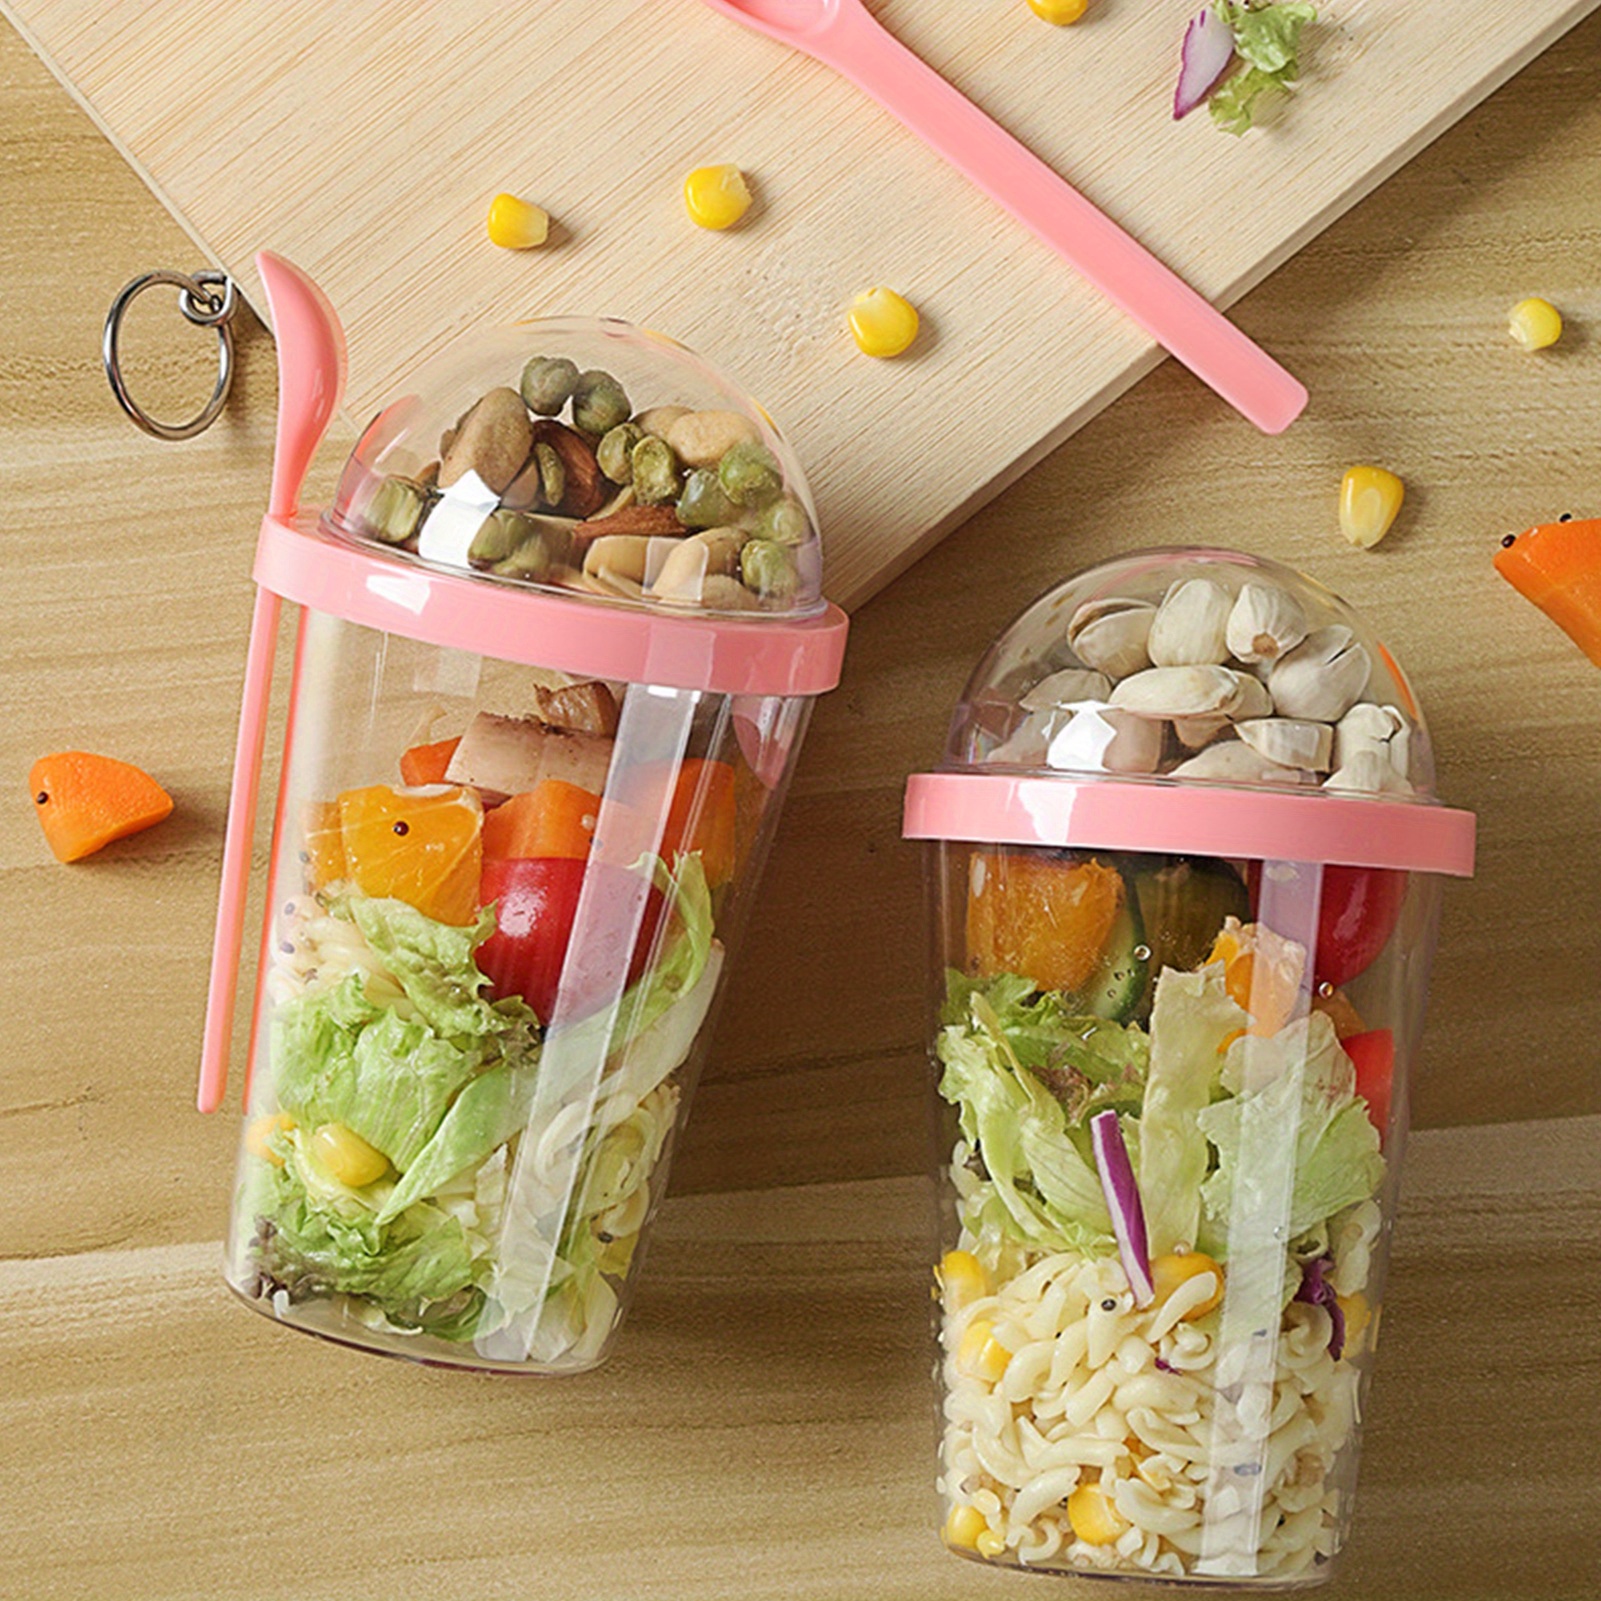 Double-layer Food Salad Cup Portable Lid with Spoon and Fork Large